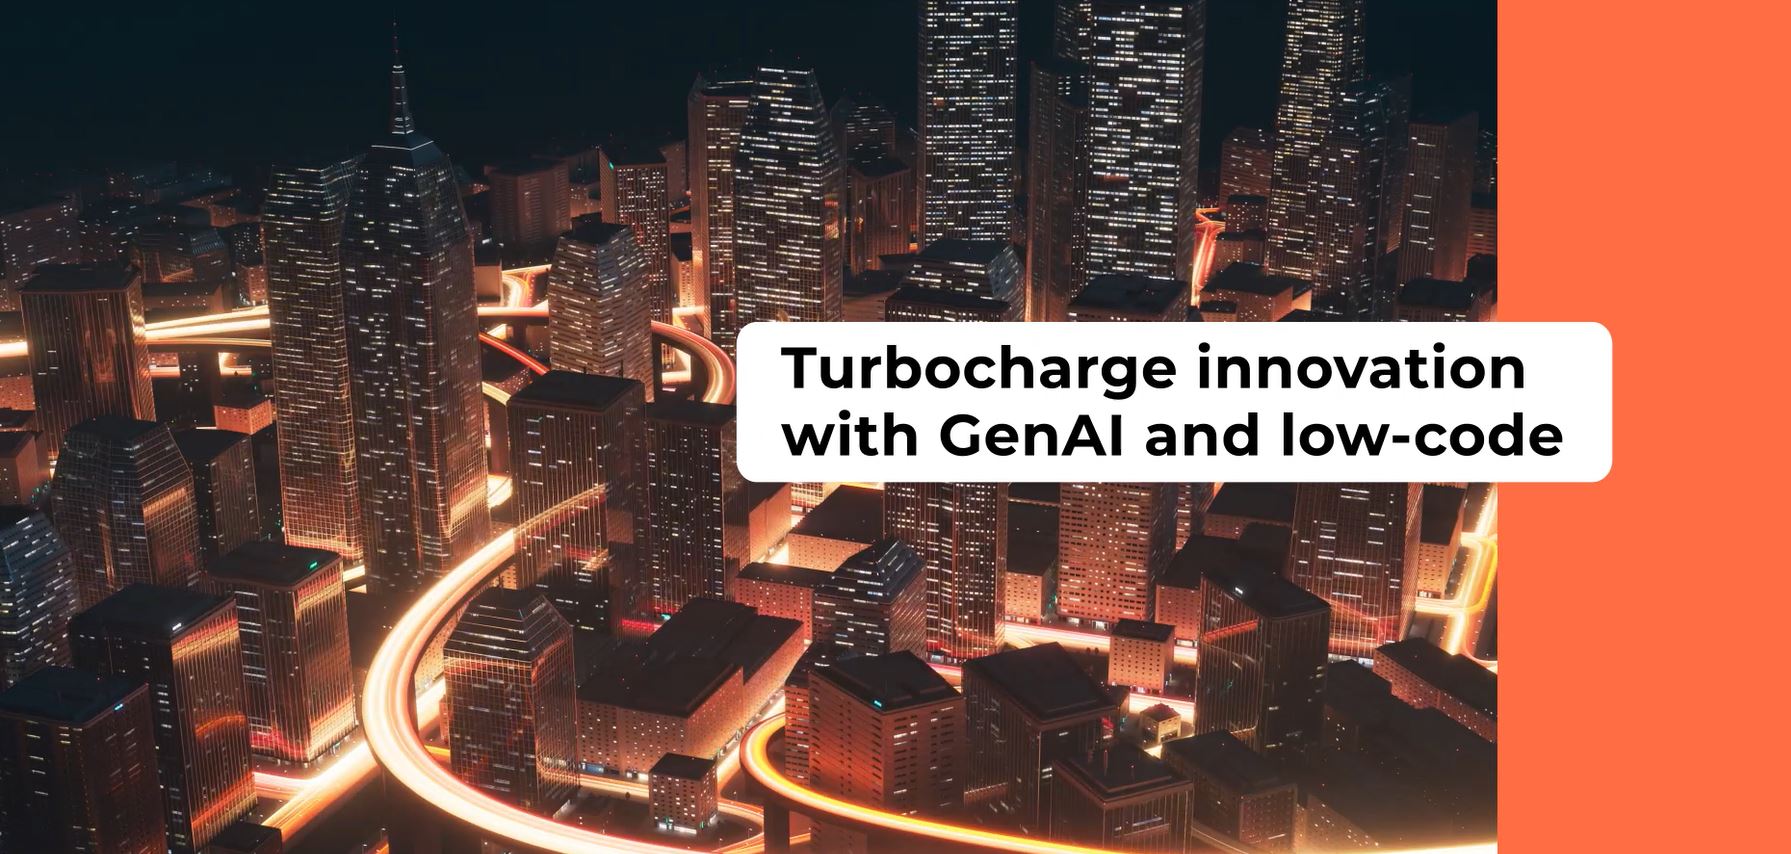 Turbocharge innovation with GenAI and low-code